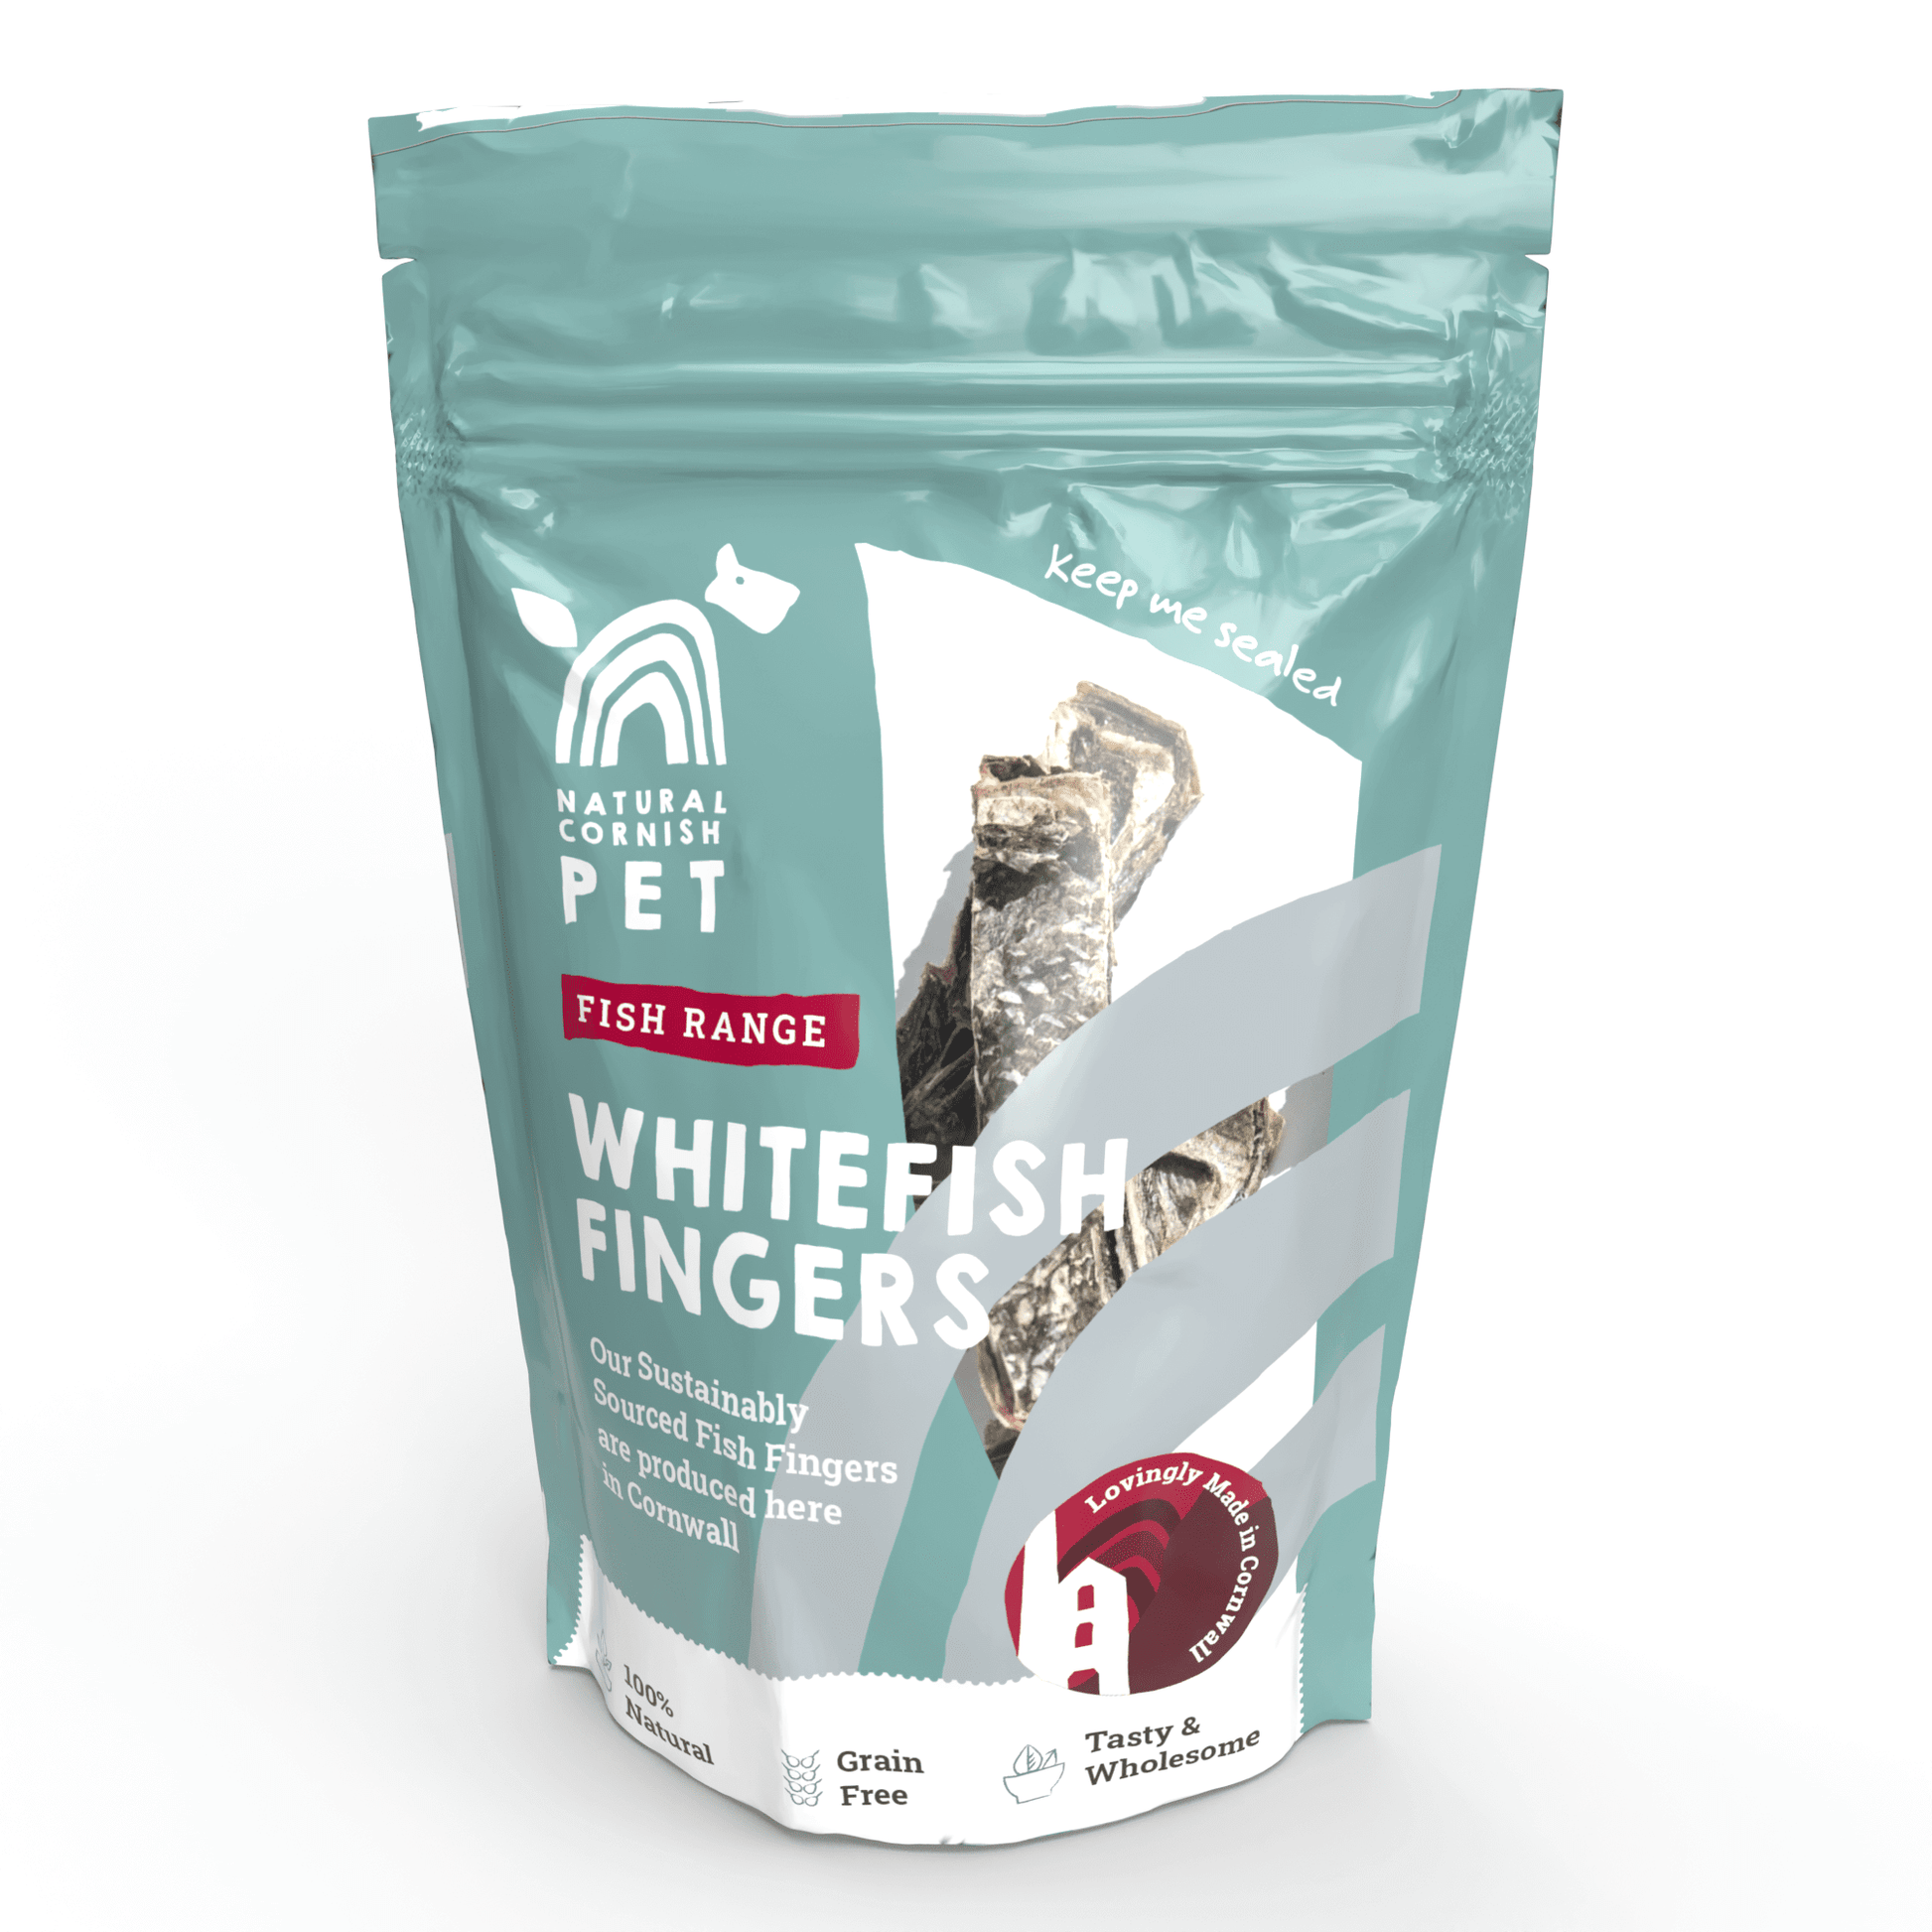 Natural Cornish Dog Treats Whitefish Fingers for Dogs